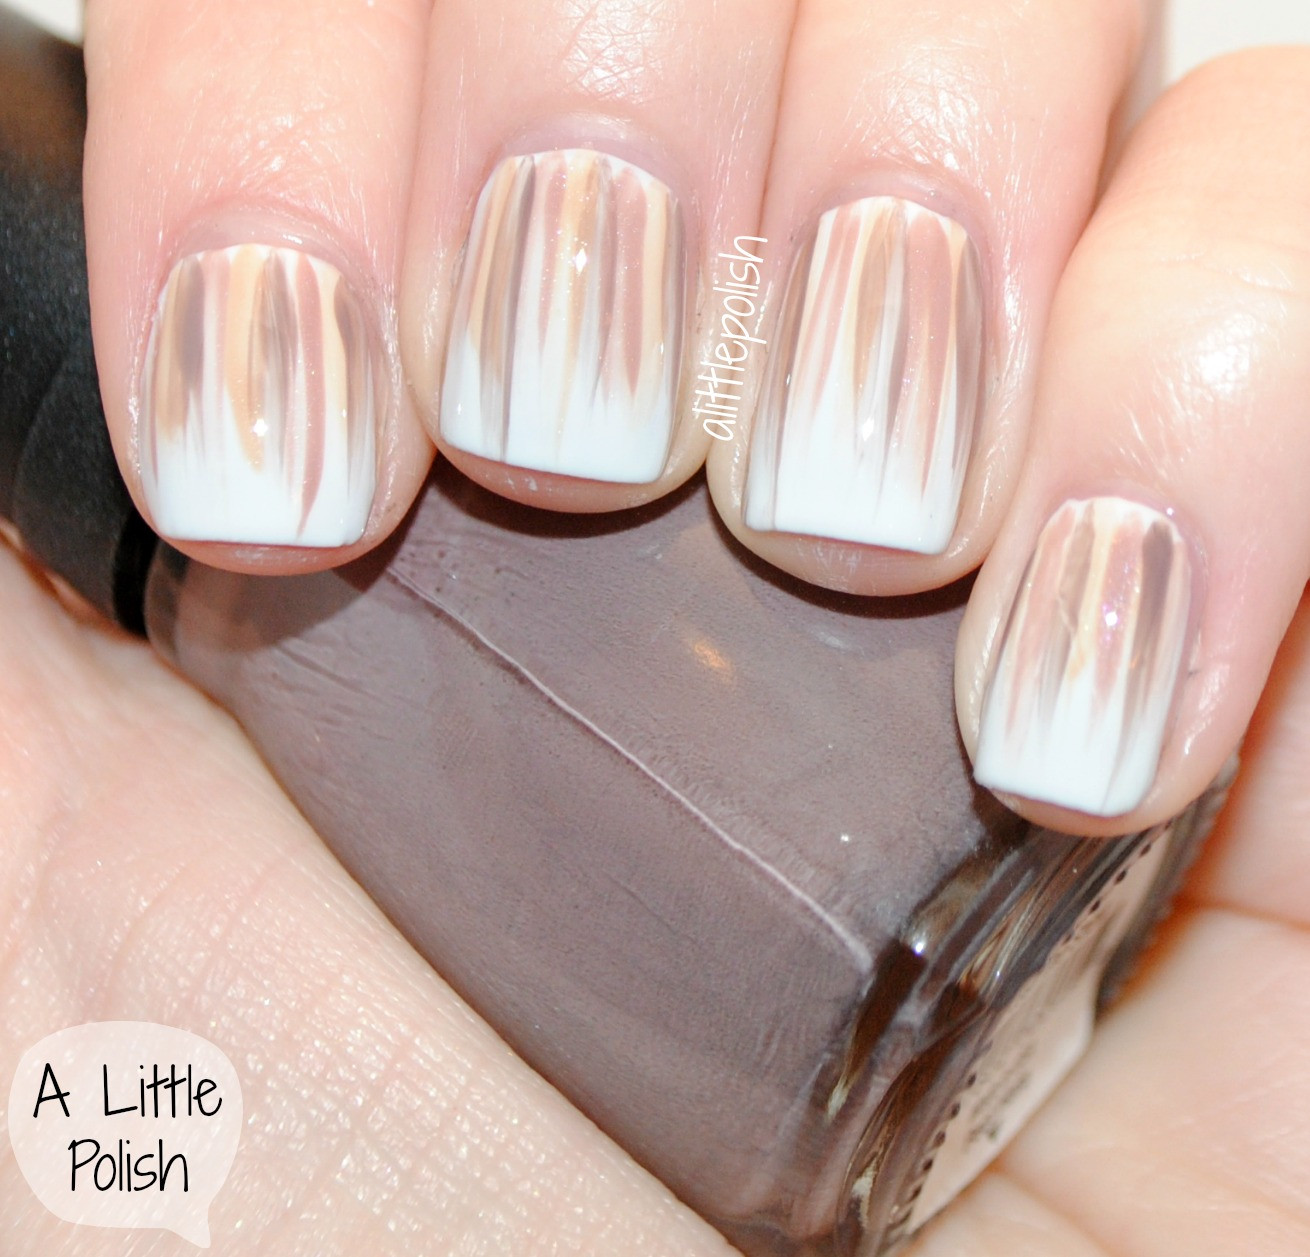 Neutral Nail Colors For Work
 A Little Polish Work Appropriate Waterfall Mani